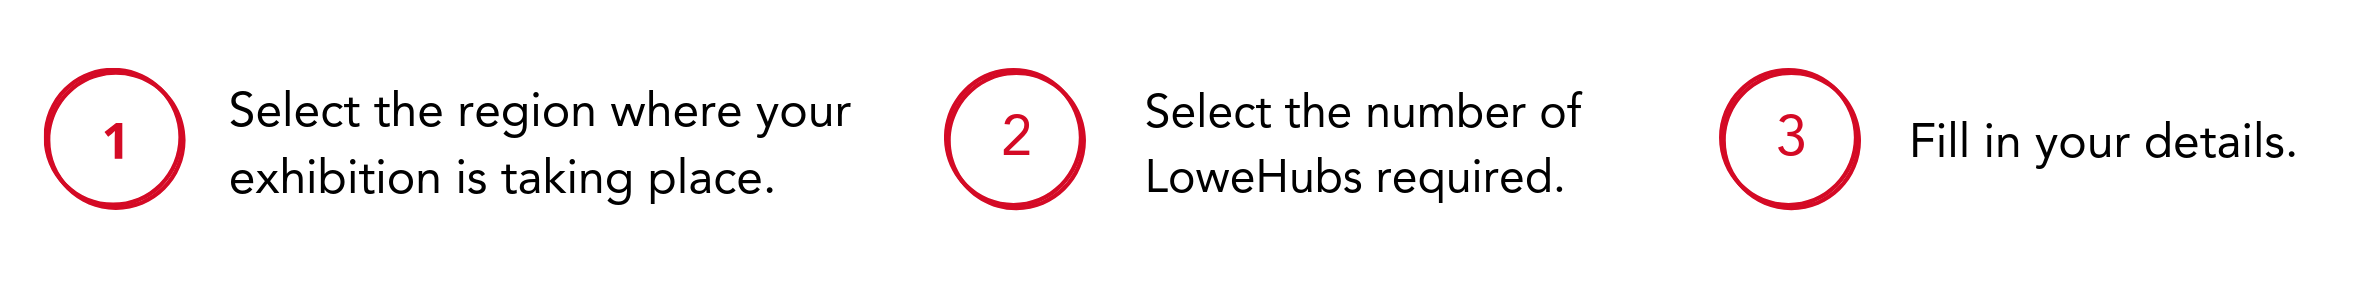 How to Book a Lowe Hub